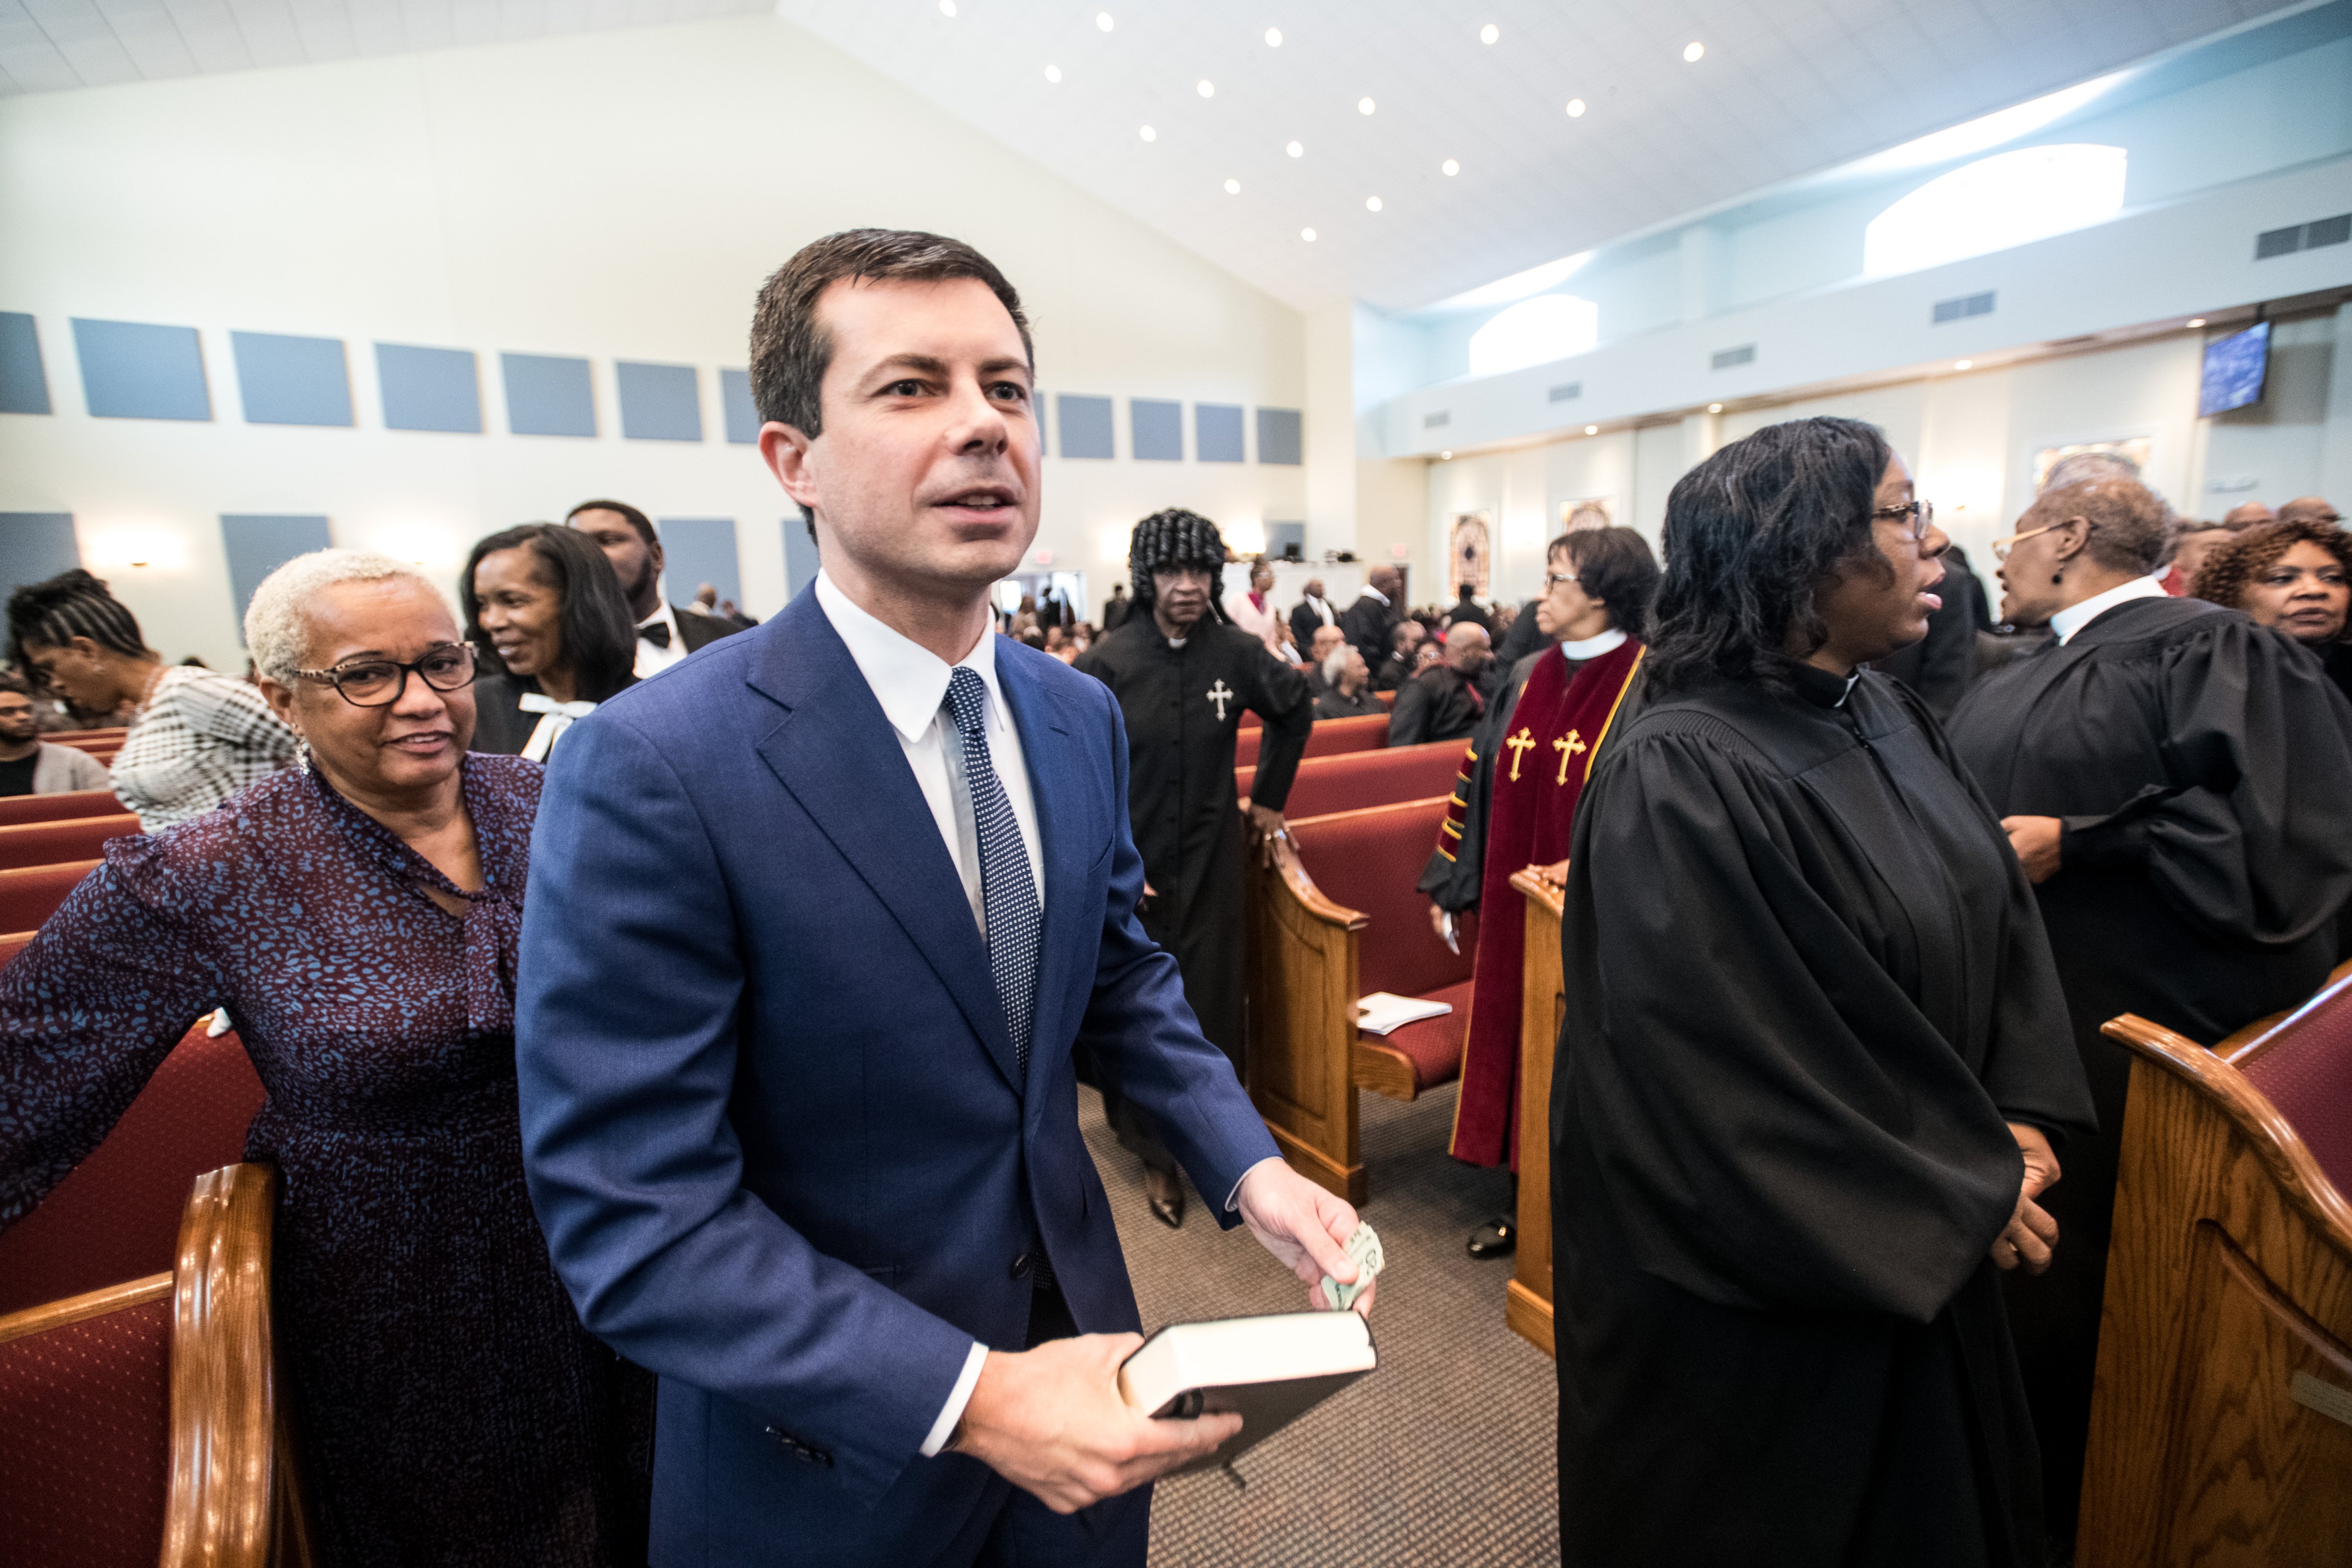 Democratic presidential candidate, South Bend, Indiana Mayor Pete Buttigieg exits a church pew during Sunday service at the Kenneth Moore Transformation Center in Rock Hill, South Carolina on Oct. 27, 2019. (Sean Rayford—Getty Images)